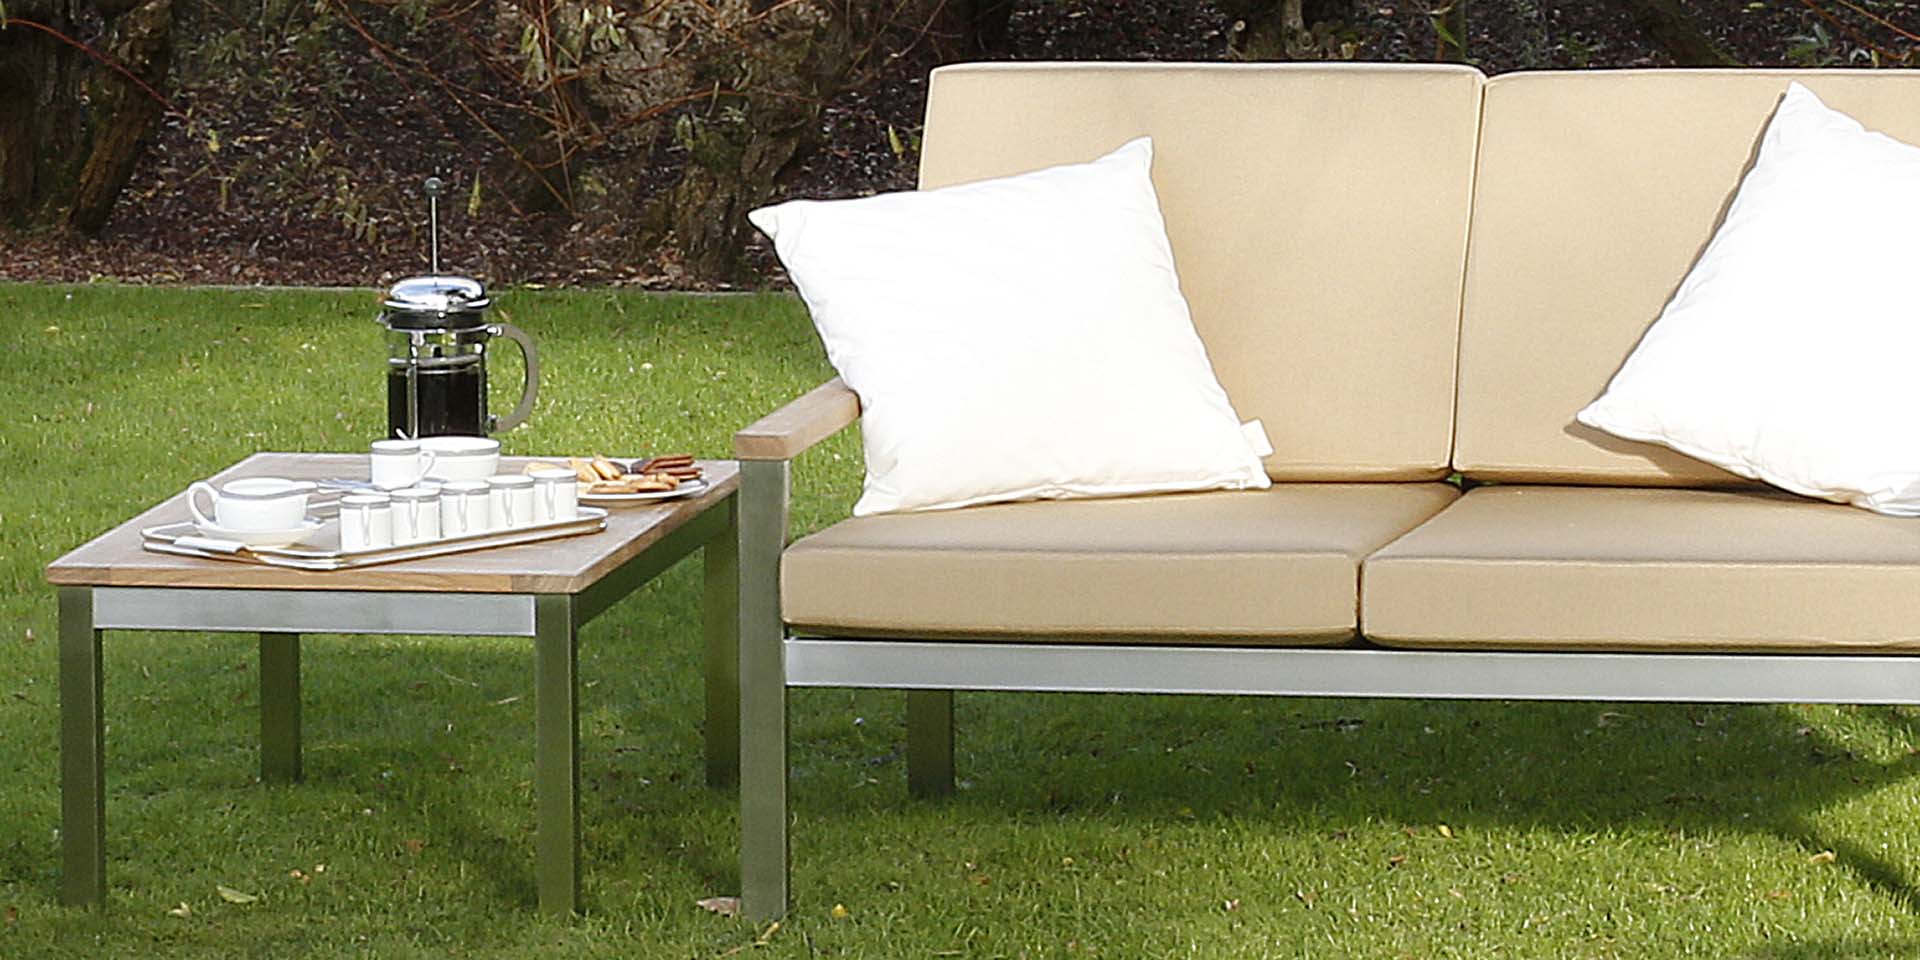 Equinox Occasional Deep Seating Three-seater Settee - Powder coated